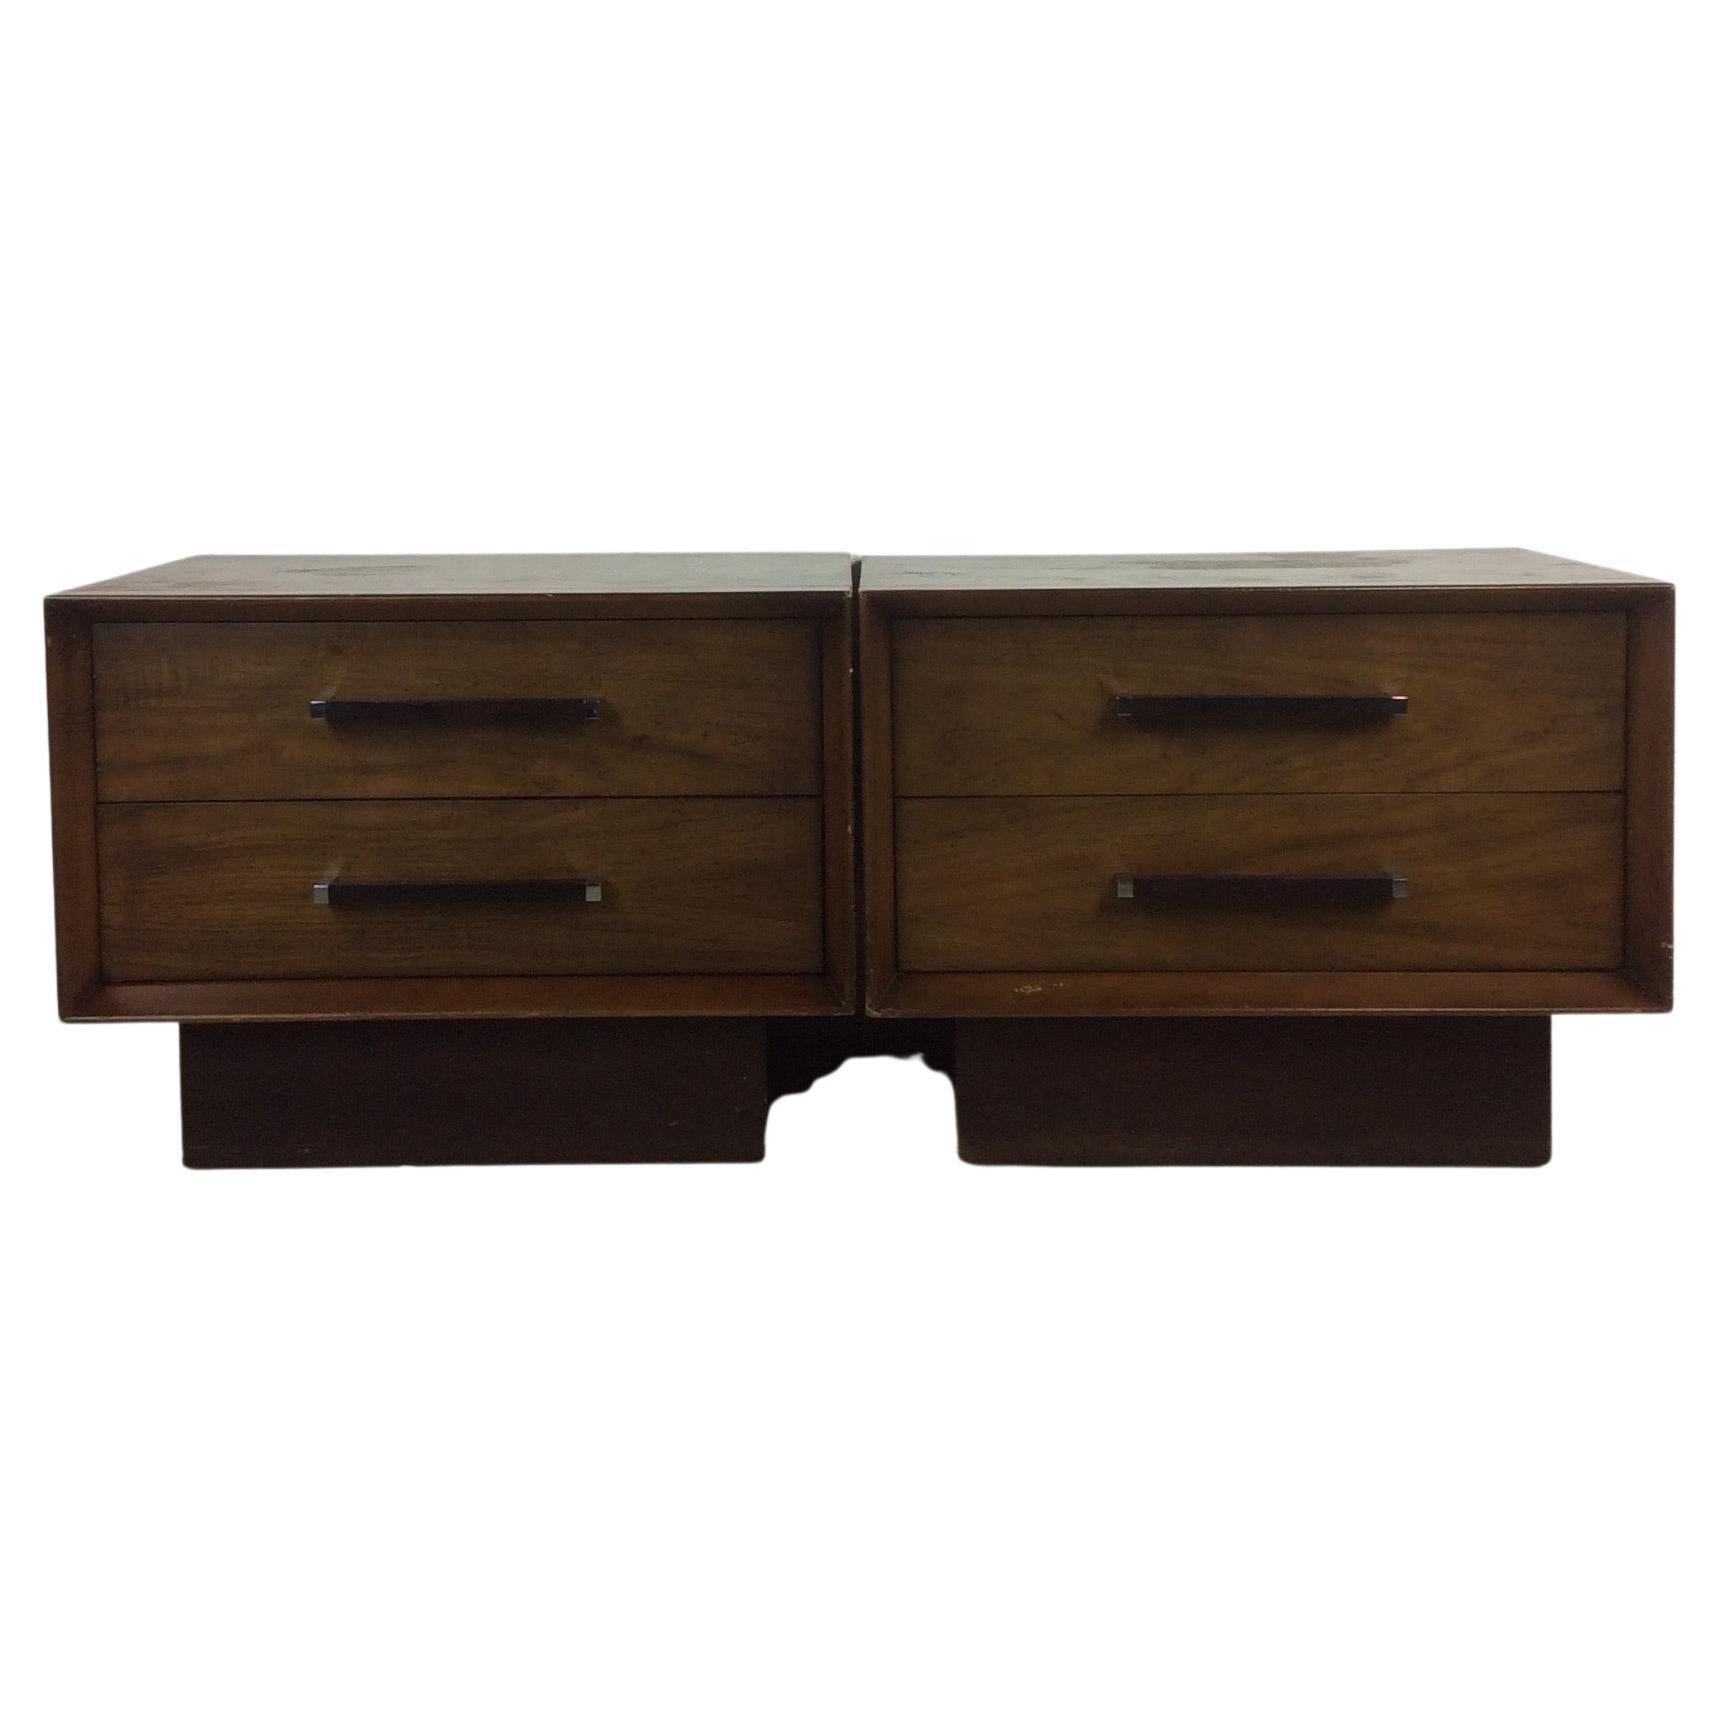 Pair of Mid Century Modern Nightstands from Tower Suite by Lane Furniture